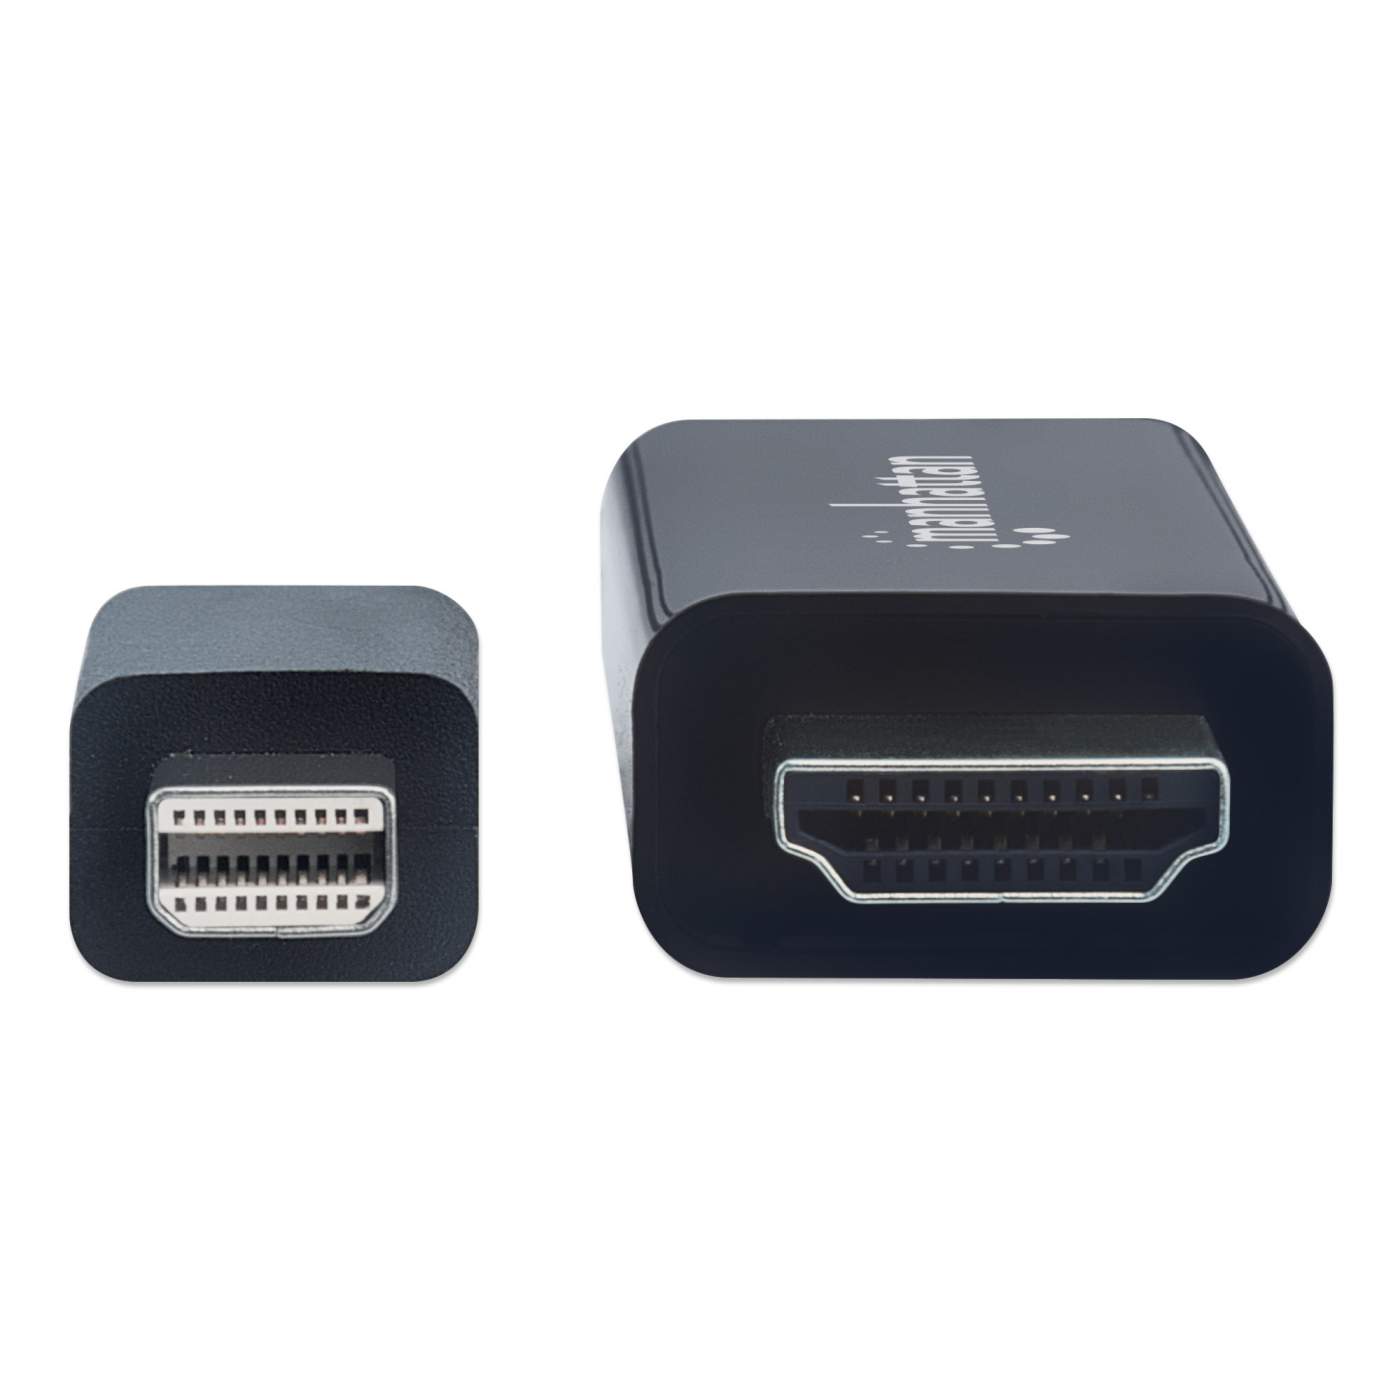 HDMI™ to Displayport Adapter - HDMI Cables - Multimedia Cables - Cables and  Sockets